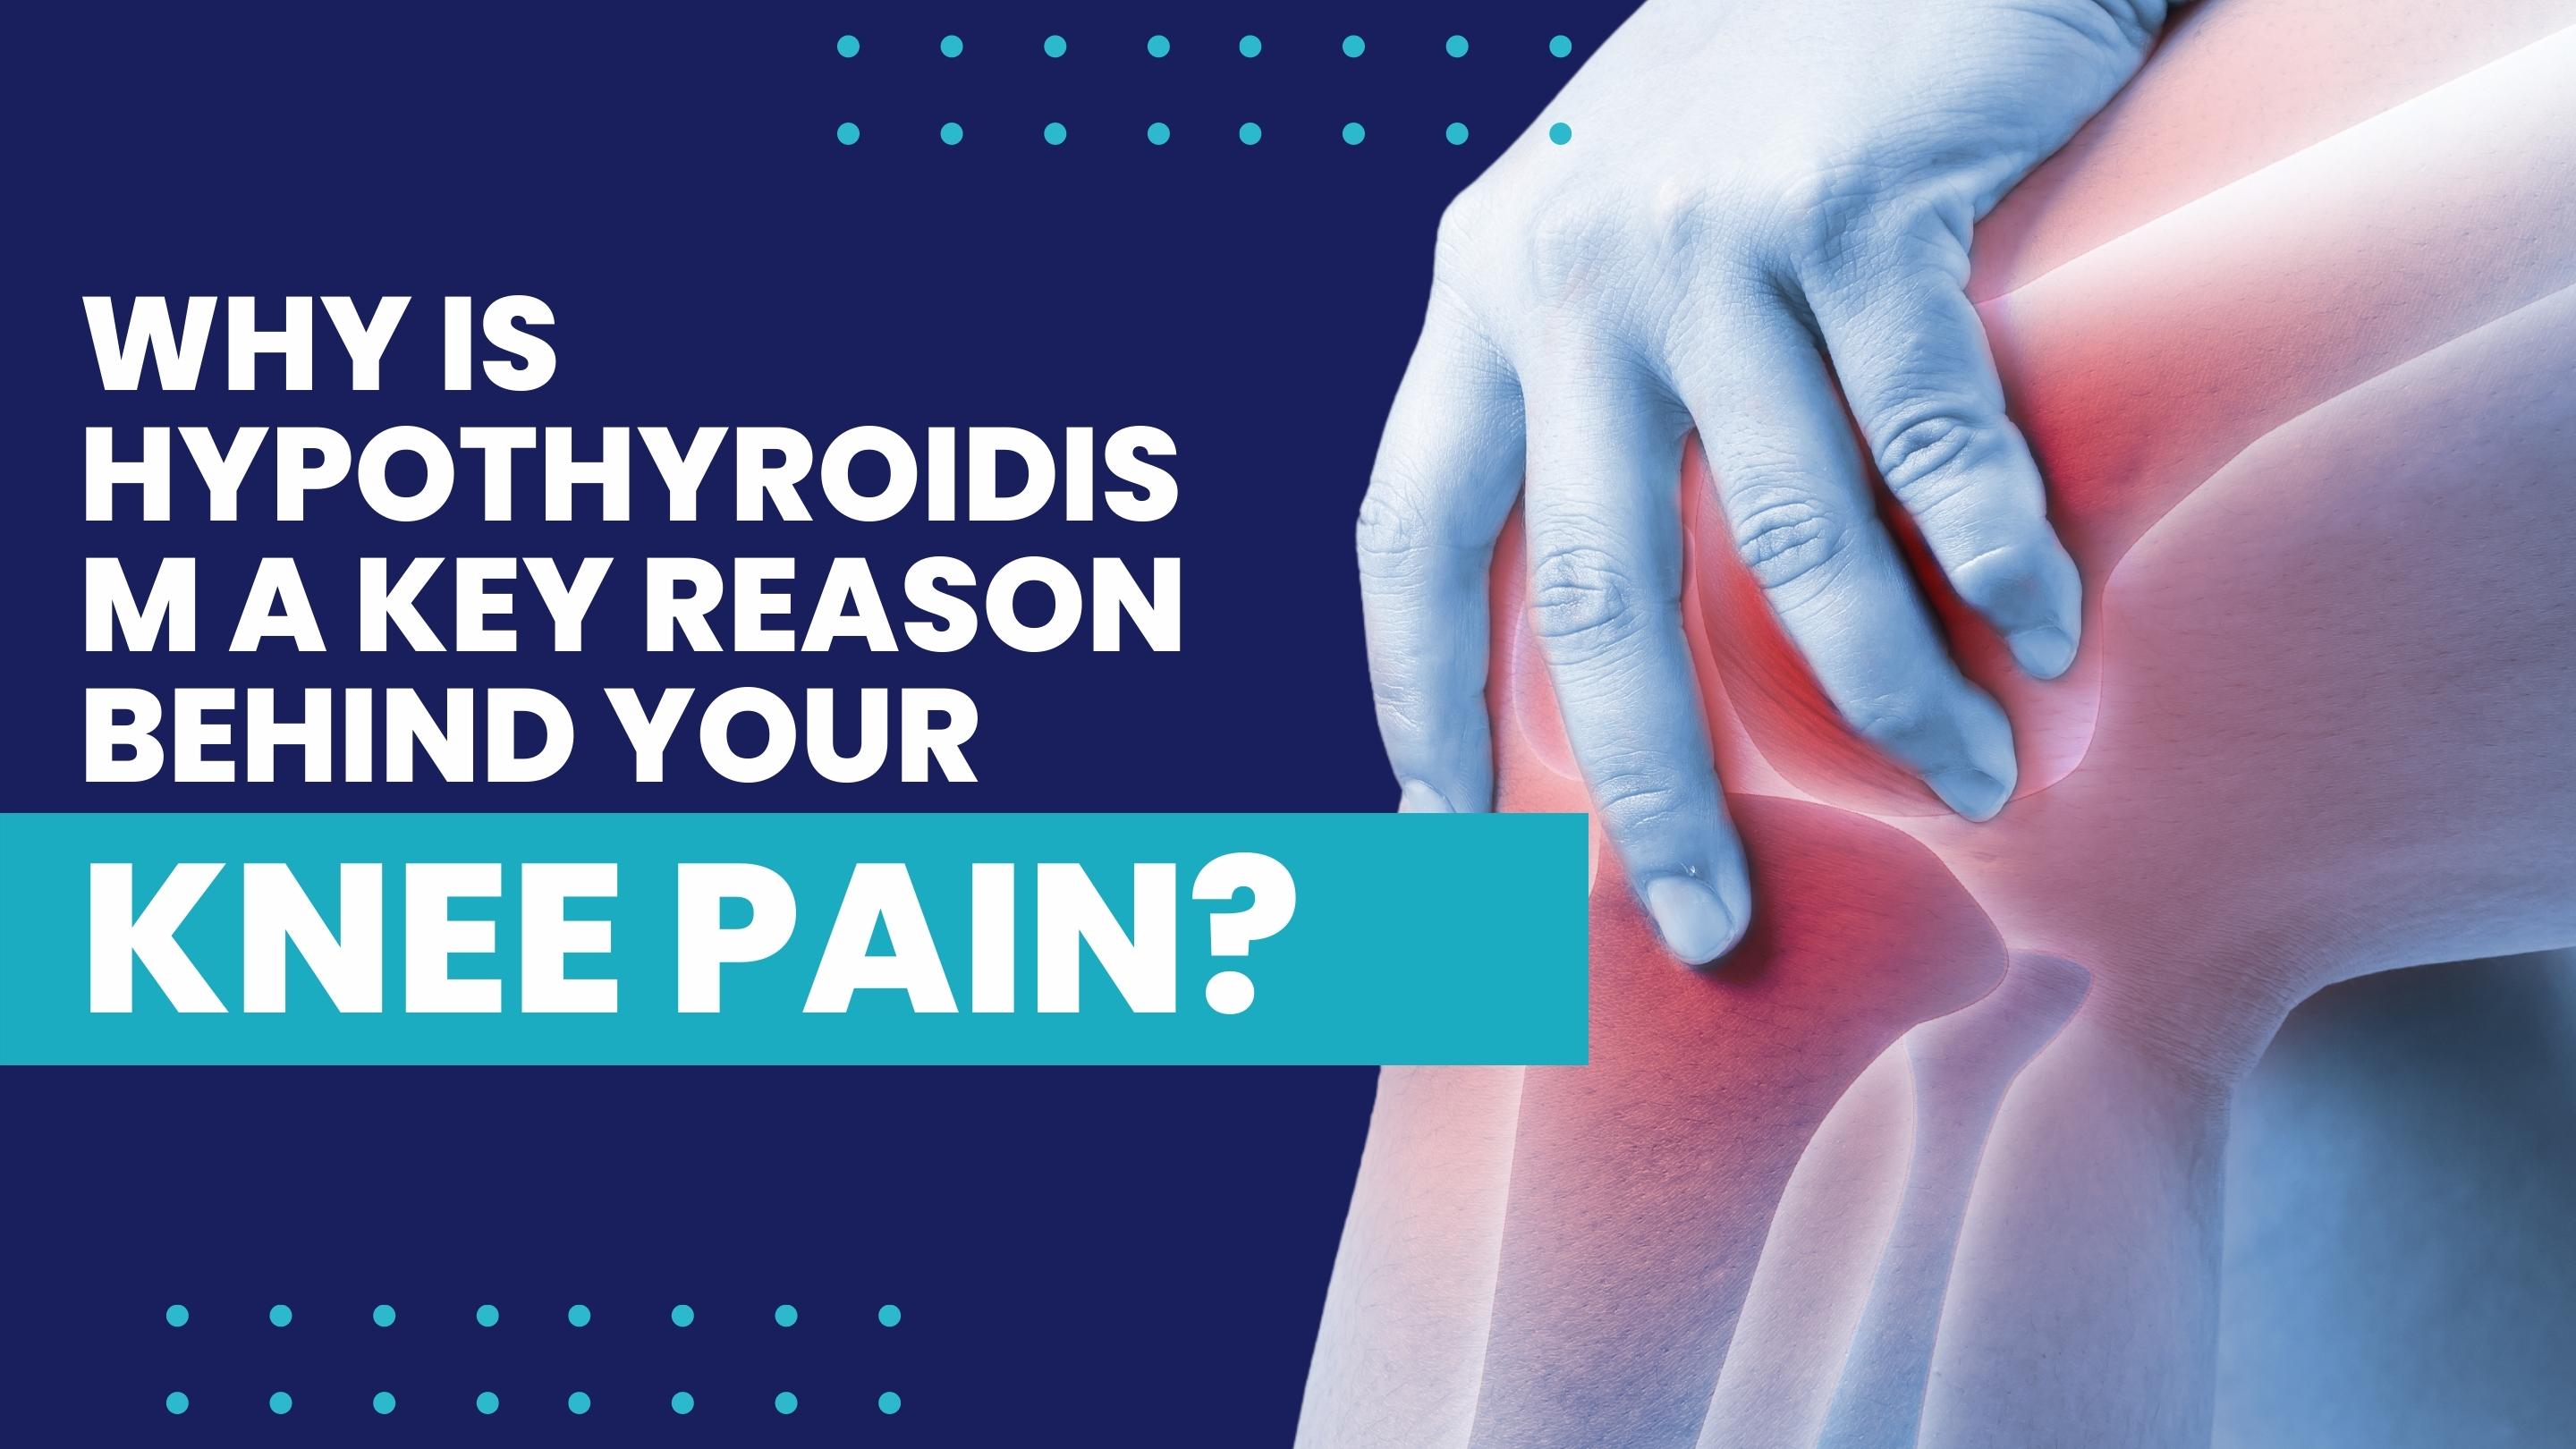 Can hypothyroidism cause knee pain